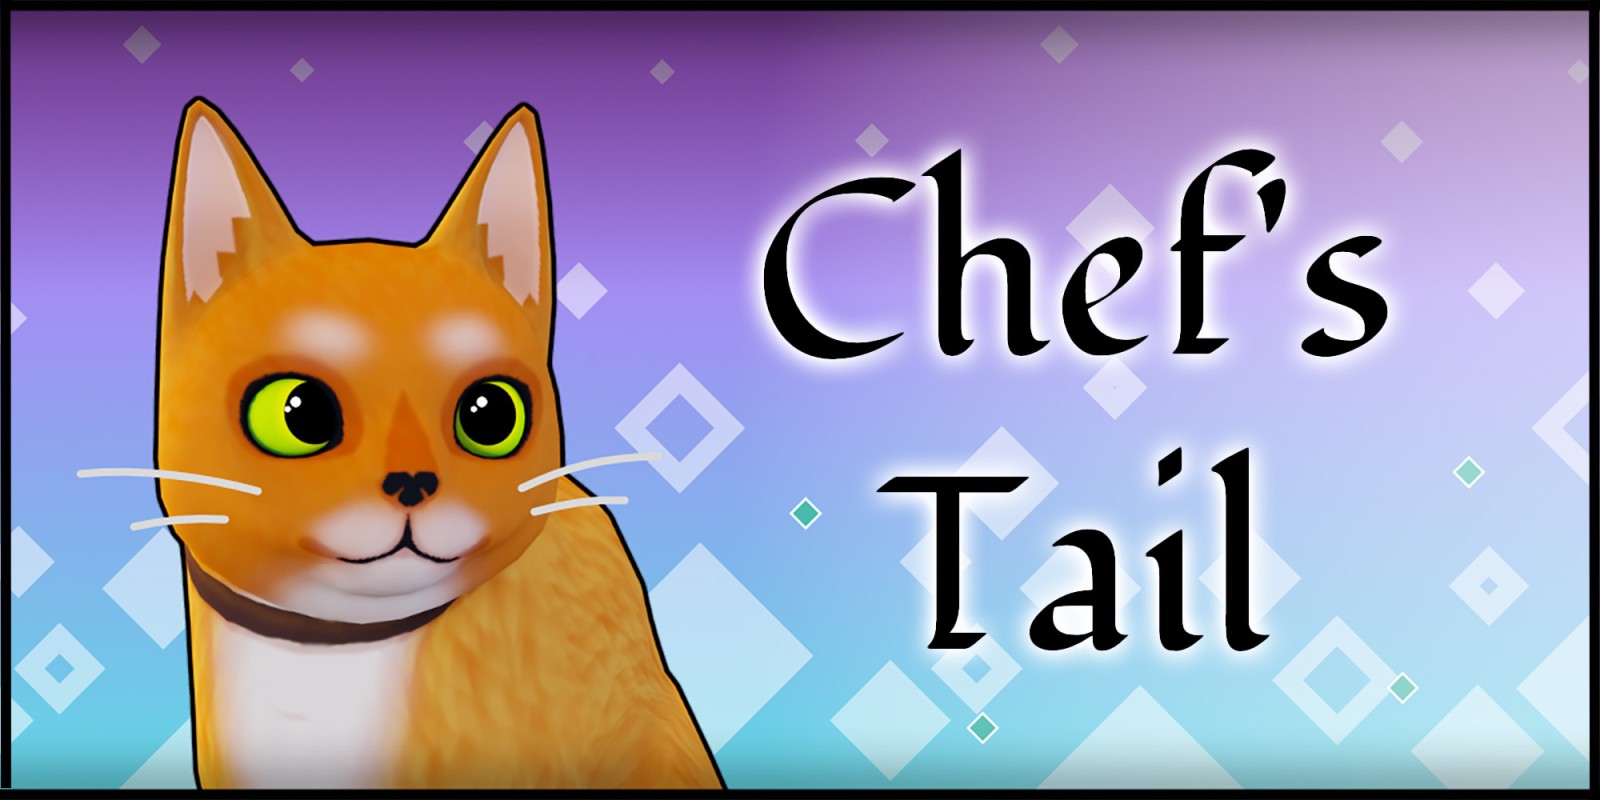 Chef's Tail